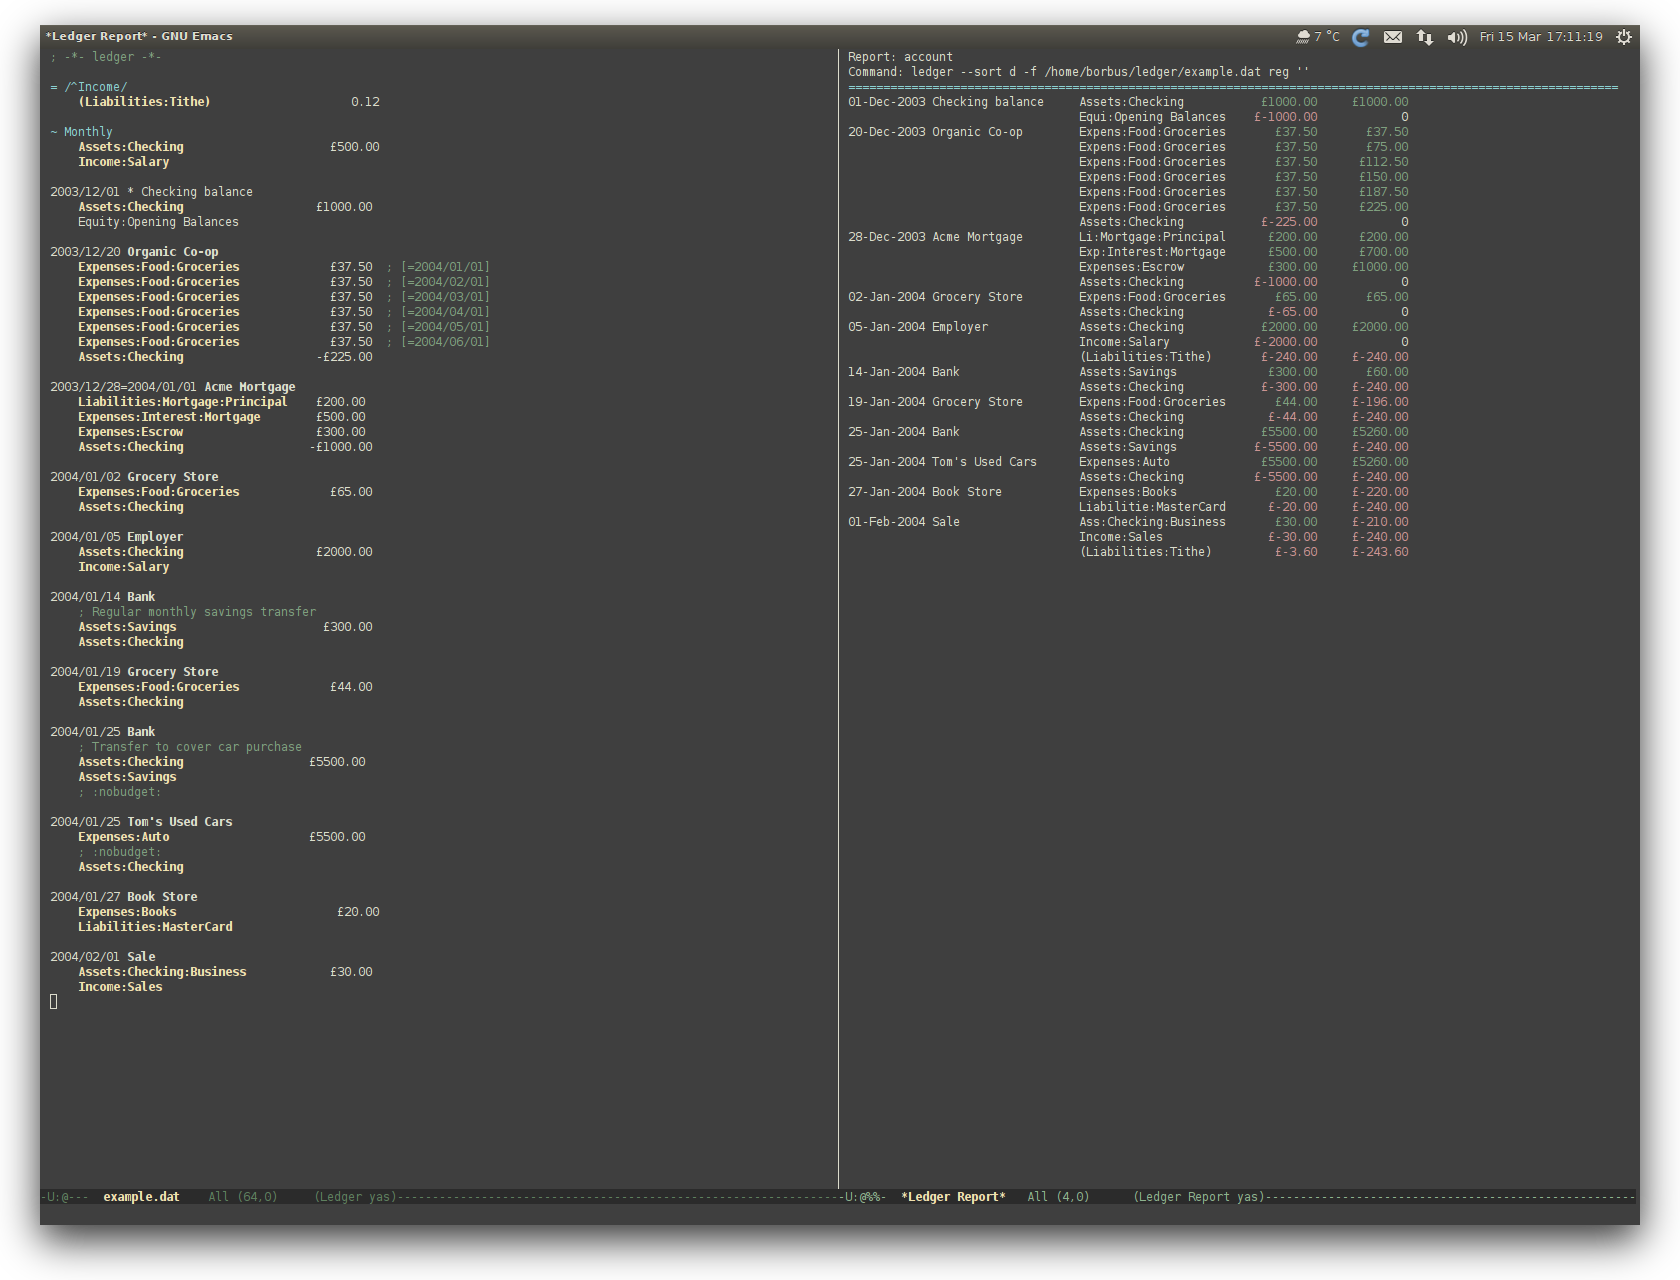 /TakeV/spacemacs/media/commit/3832a601c40b6d716f1a21e192d4181d004af17d/layers/finance/img/ledger.png